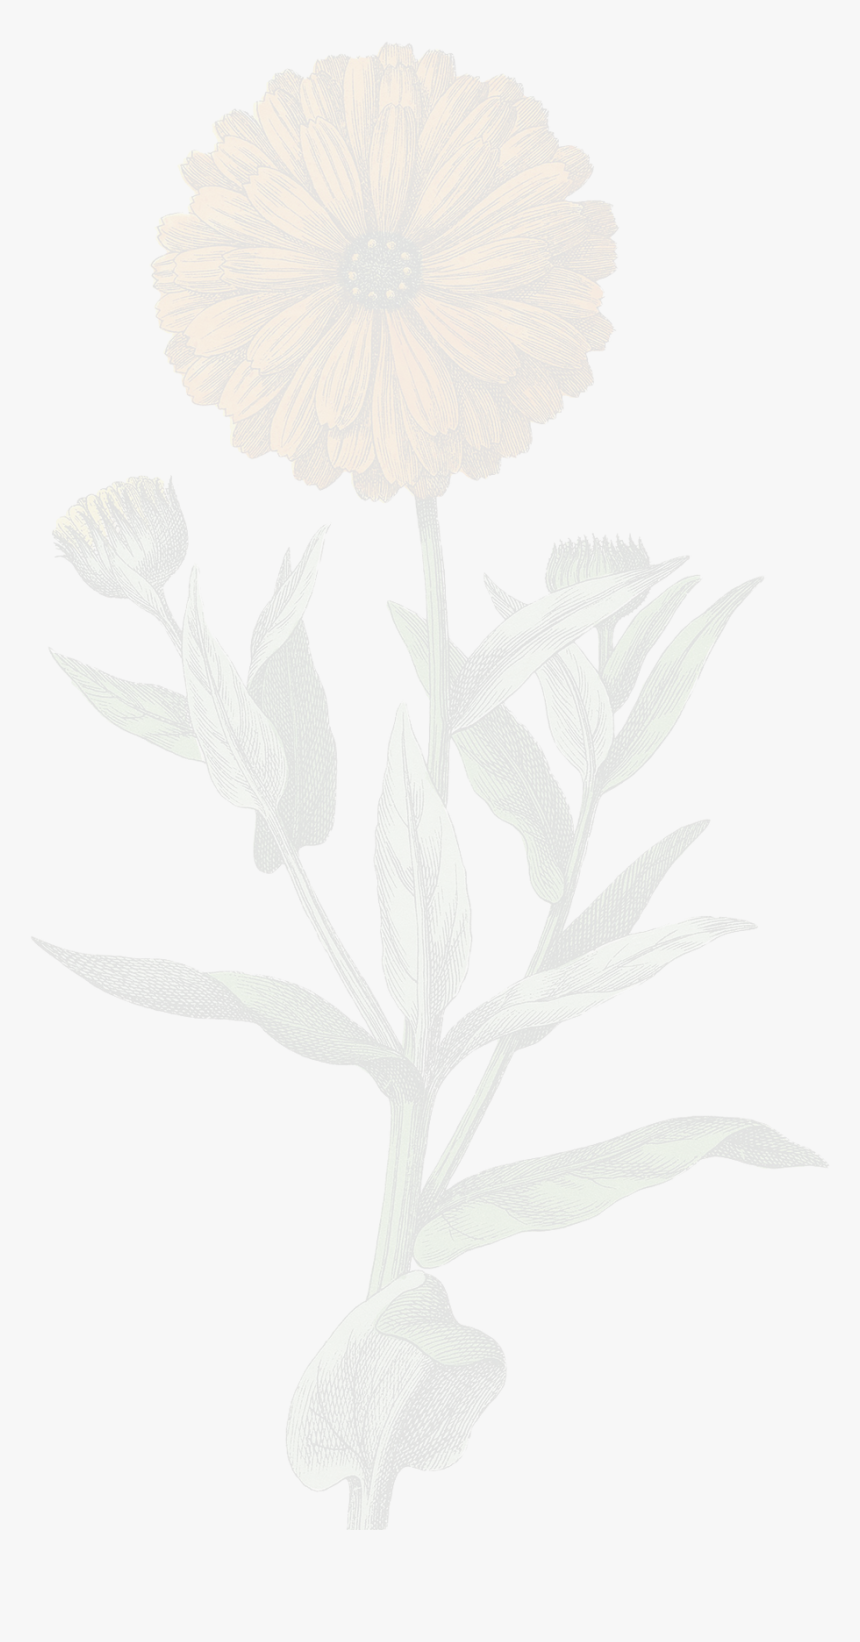 Marigold-lessopaque - Camomile, HD Png Download, Free Download